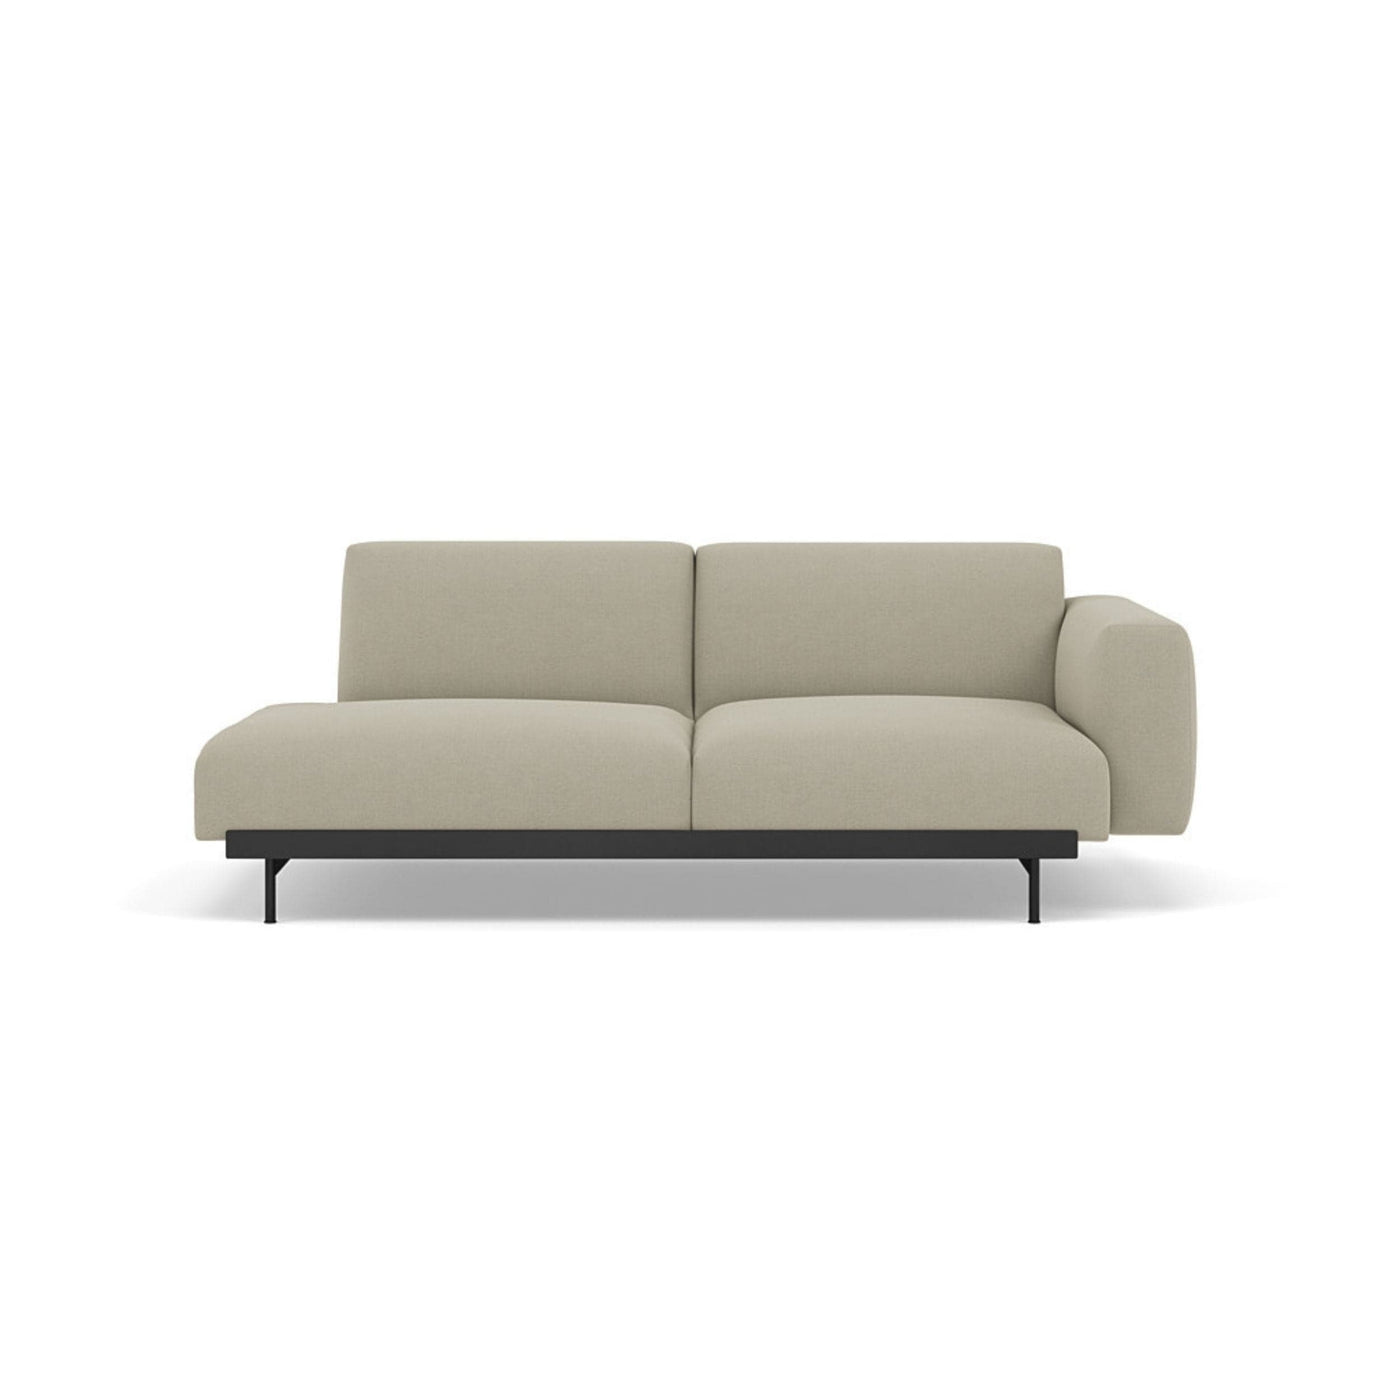 Muuto In Situ Modular 2 Seater Sofa, configuration 2. Made to order from someday designs #colour_fiord-322